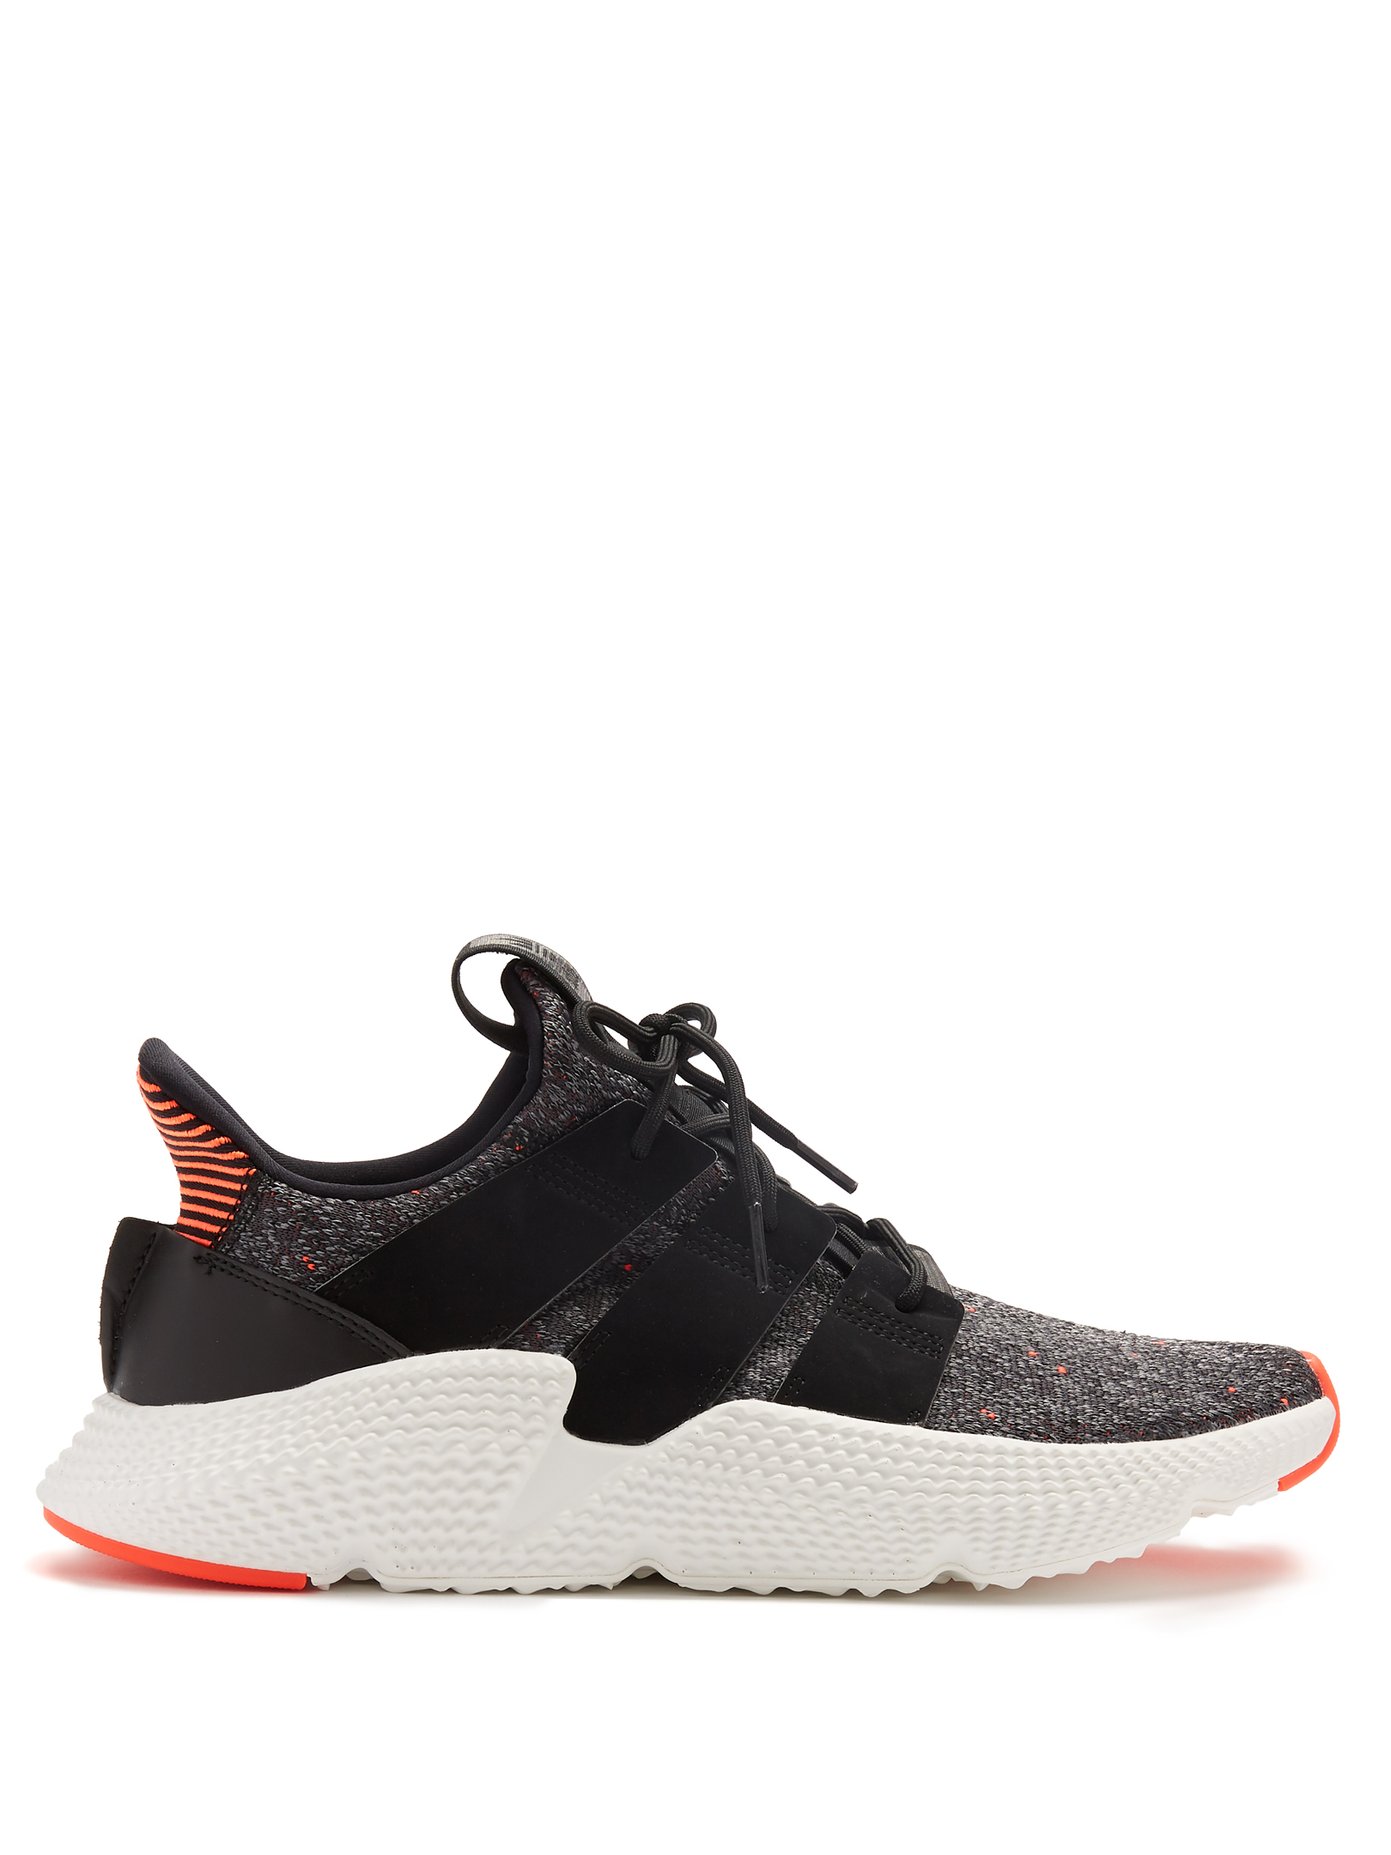 adidas prophere true to size